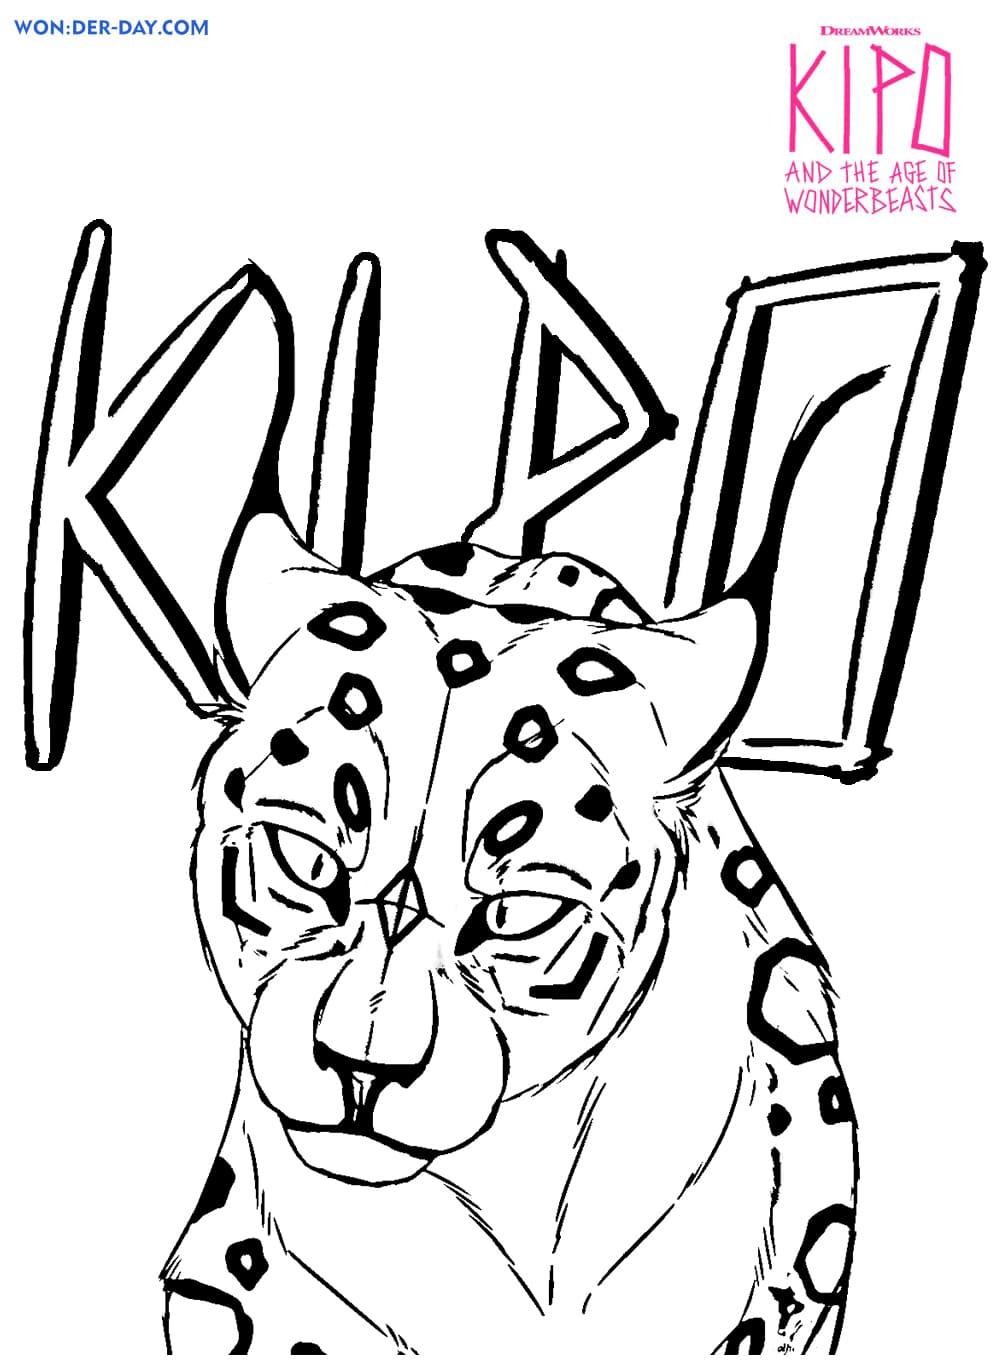 Kipo and the Age of Wonderbeasts coloring pages | WONDER DAY — Coloring  pages for children and adults